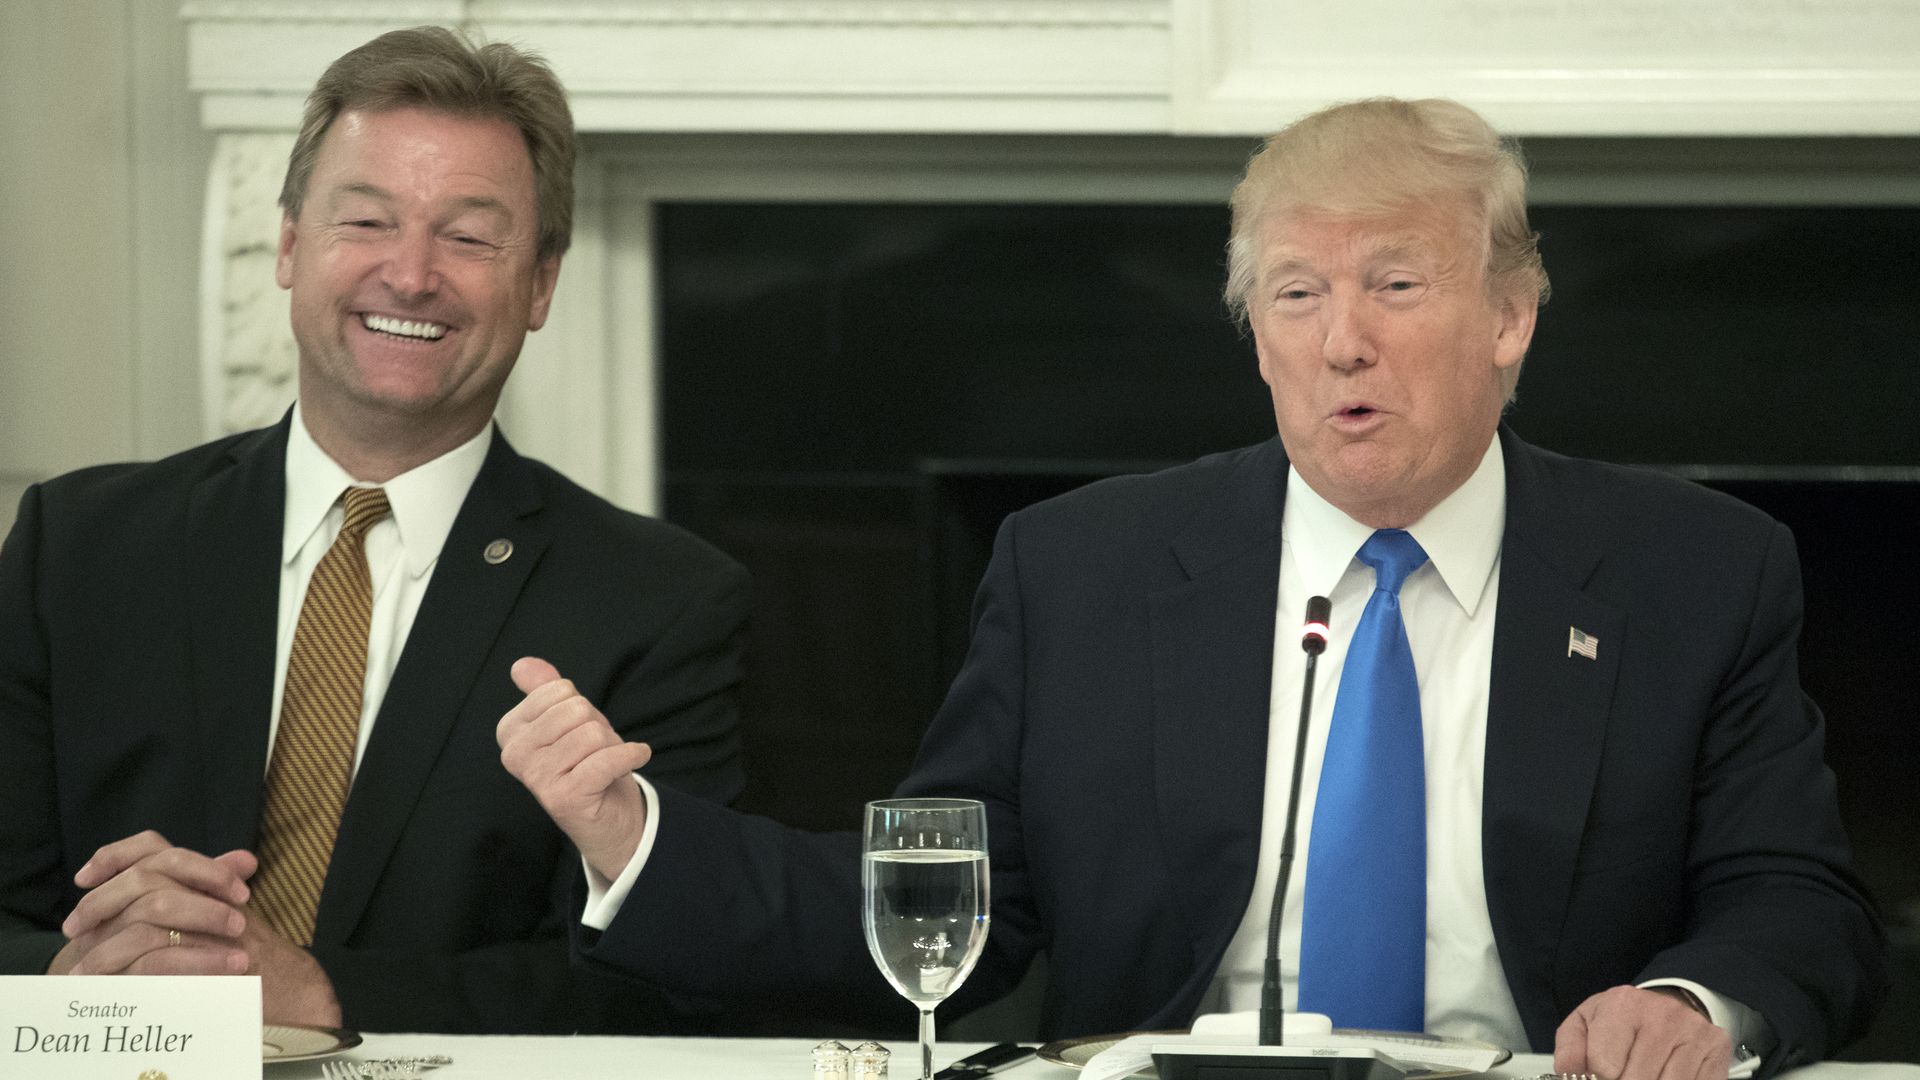 Sen. Dean Heller and President Trump sitting at a table next to each other